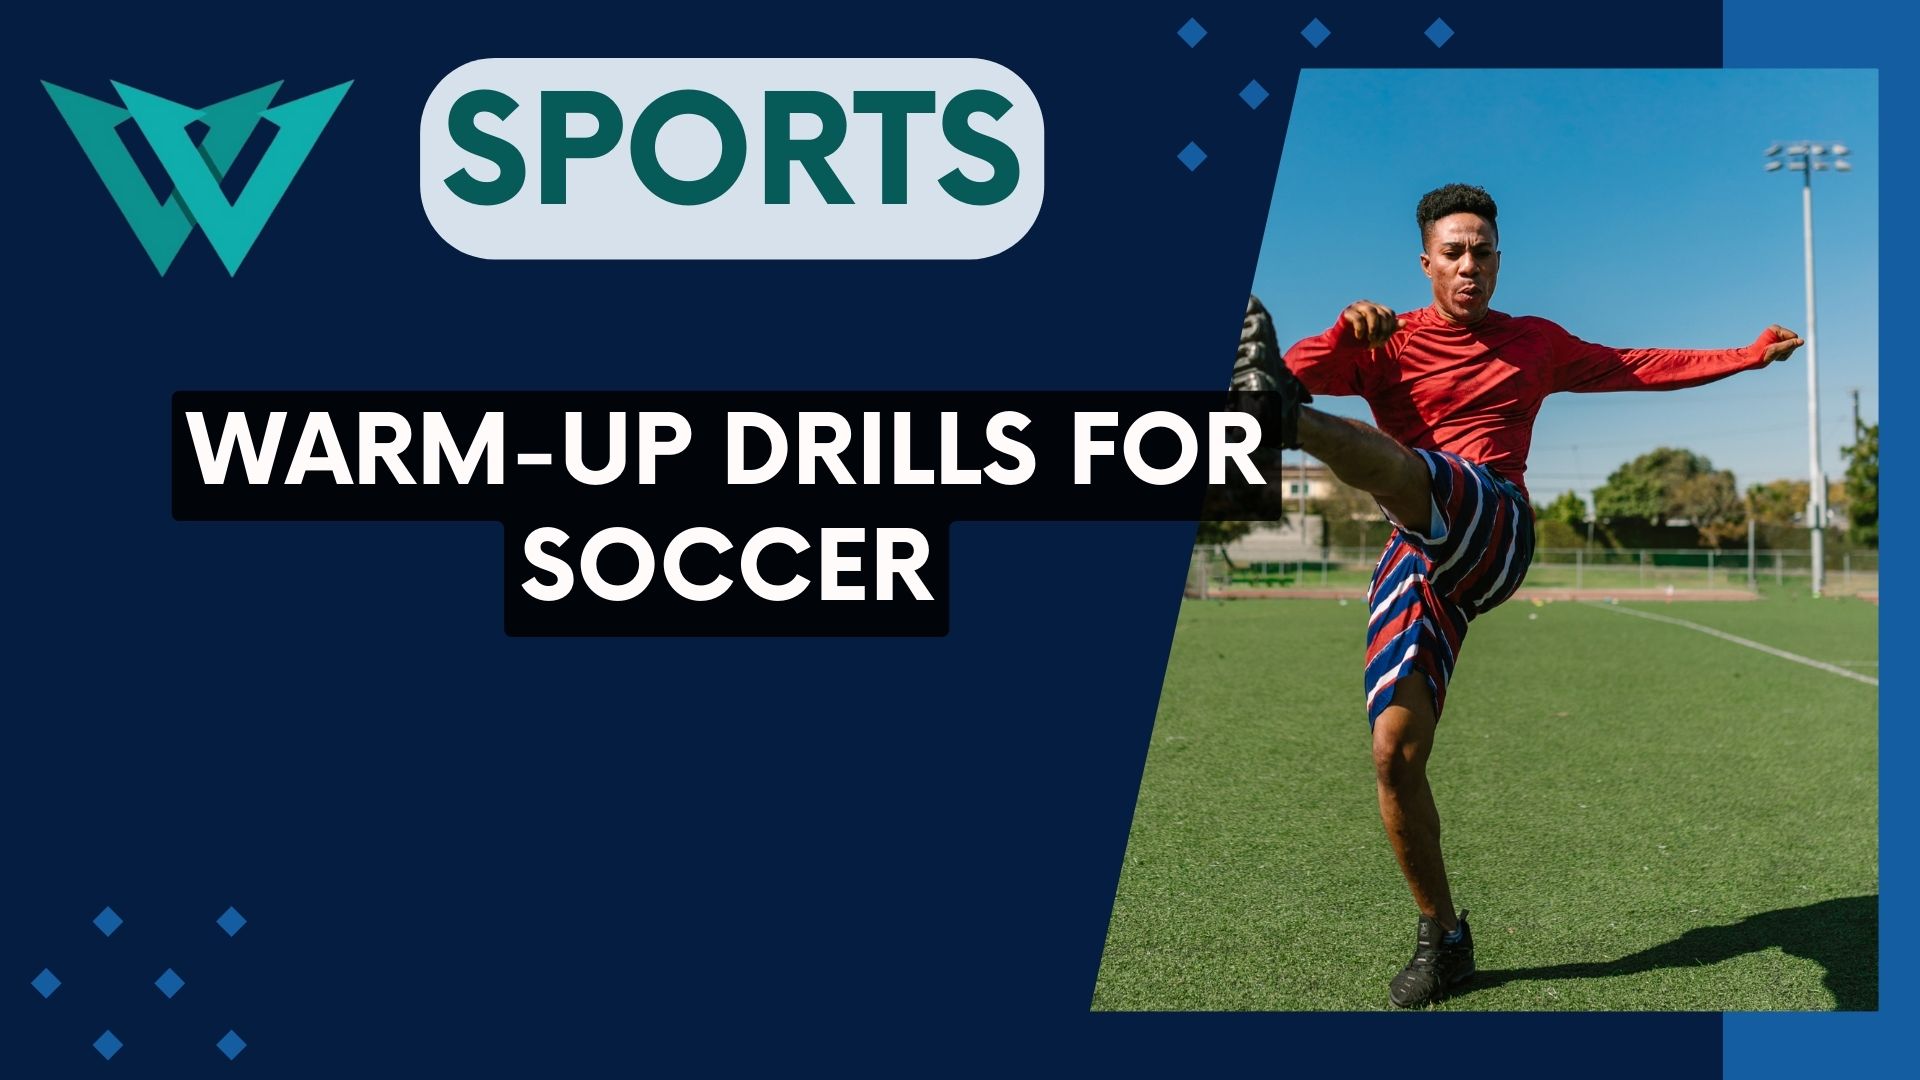 Warm-Up Drills for Soccer